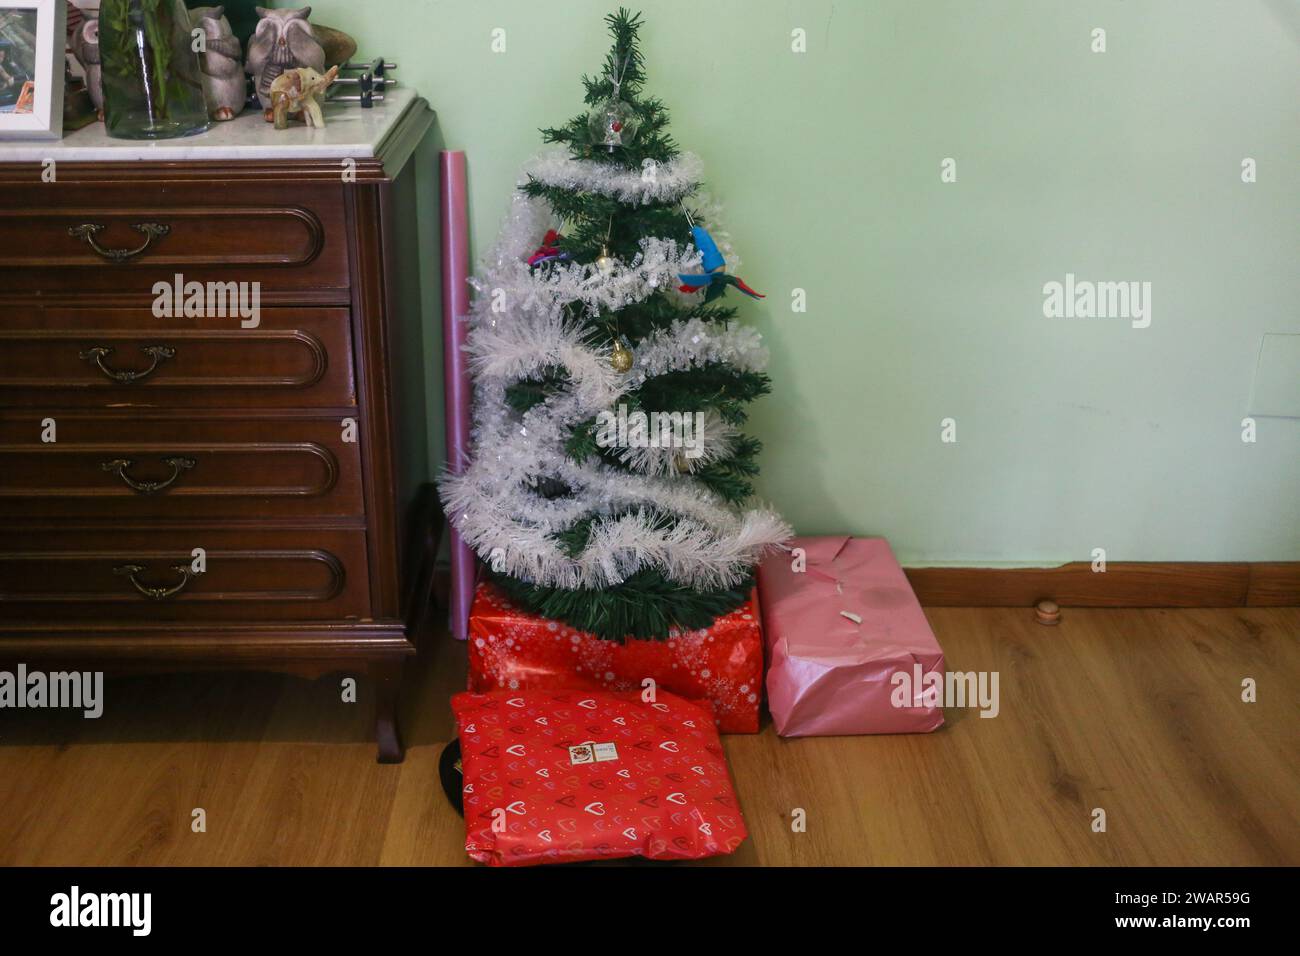 Noreña, Spain, January 06th, 2024: The Christmas tree with the gifts left by HM The Three Wise Men of the East during the Epiphany Day gifts, on January 6, 2024, in Noreña, Spain. Credit: Alberto Brevers / Alamy Live News. Stock Photo